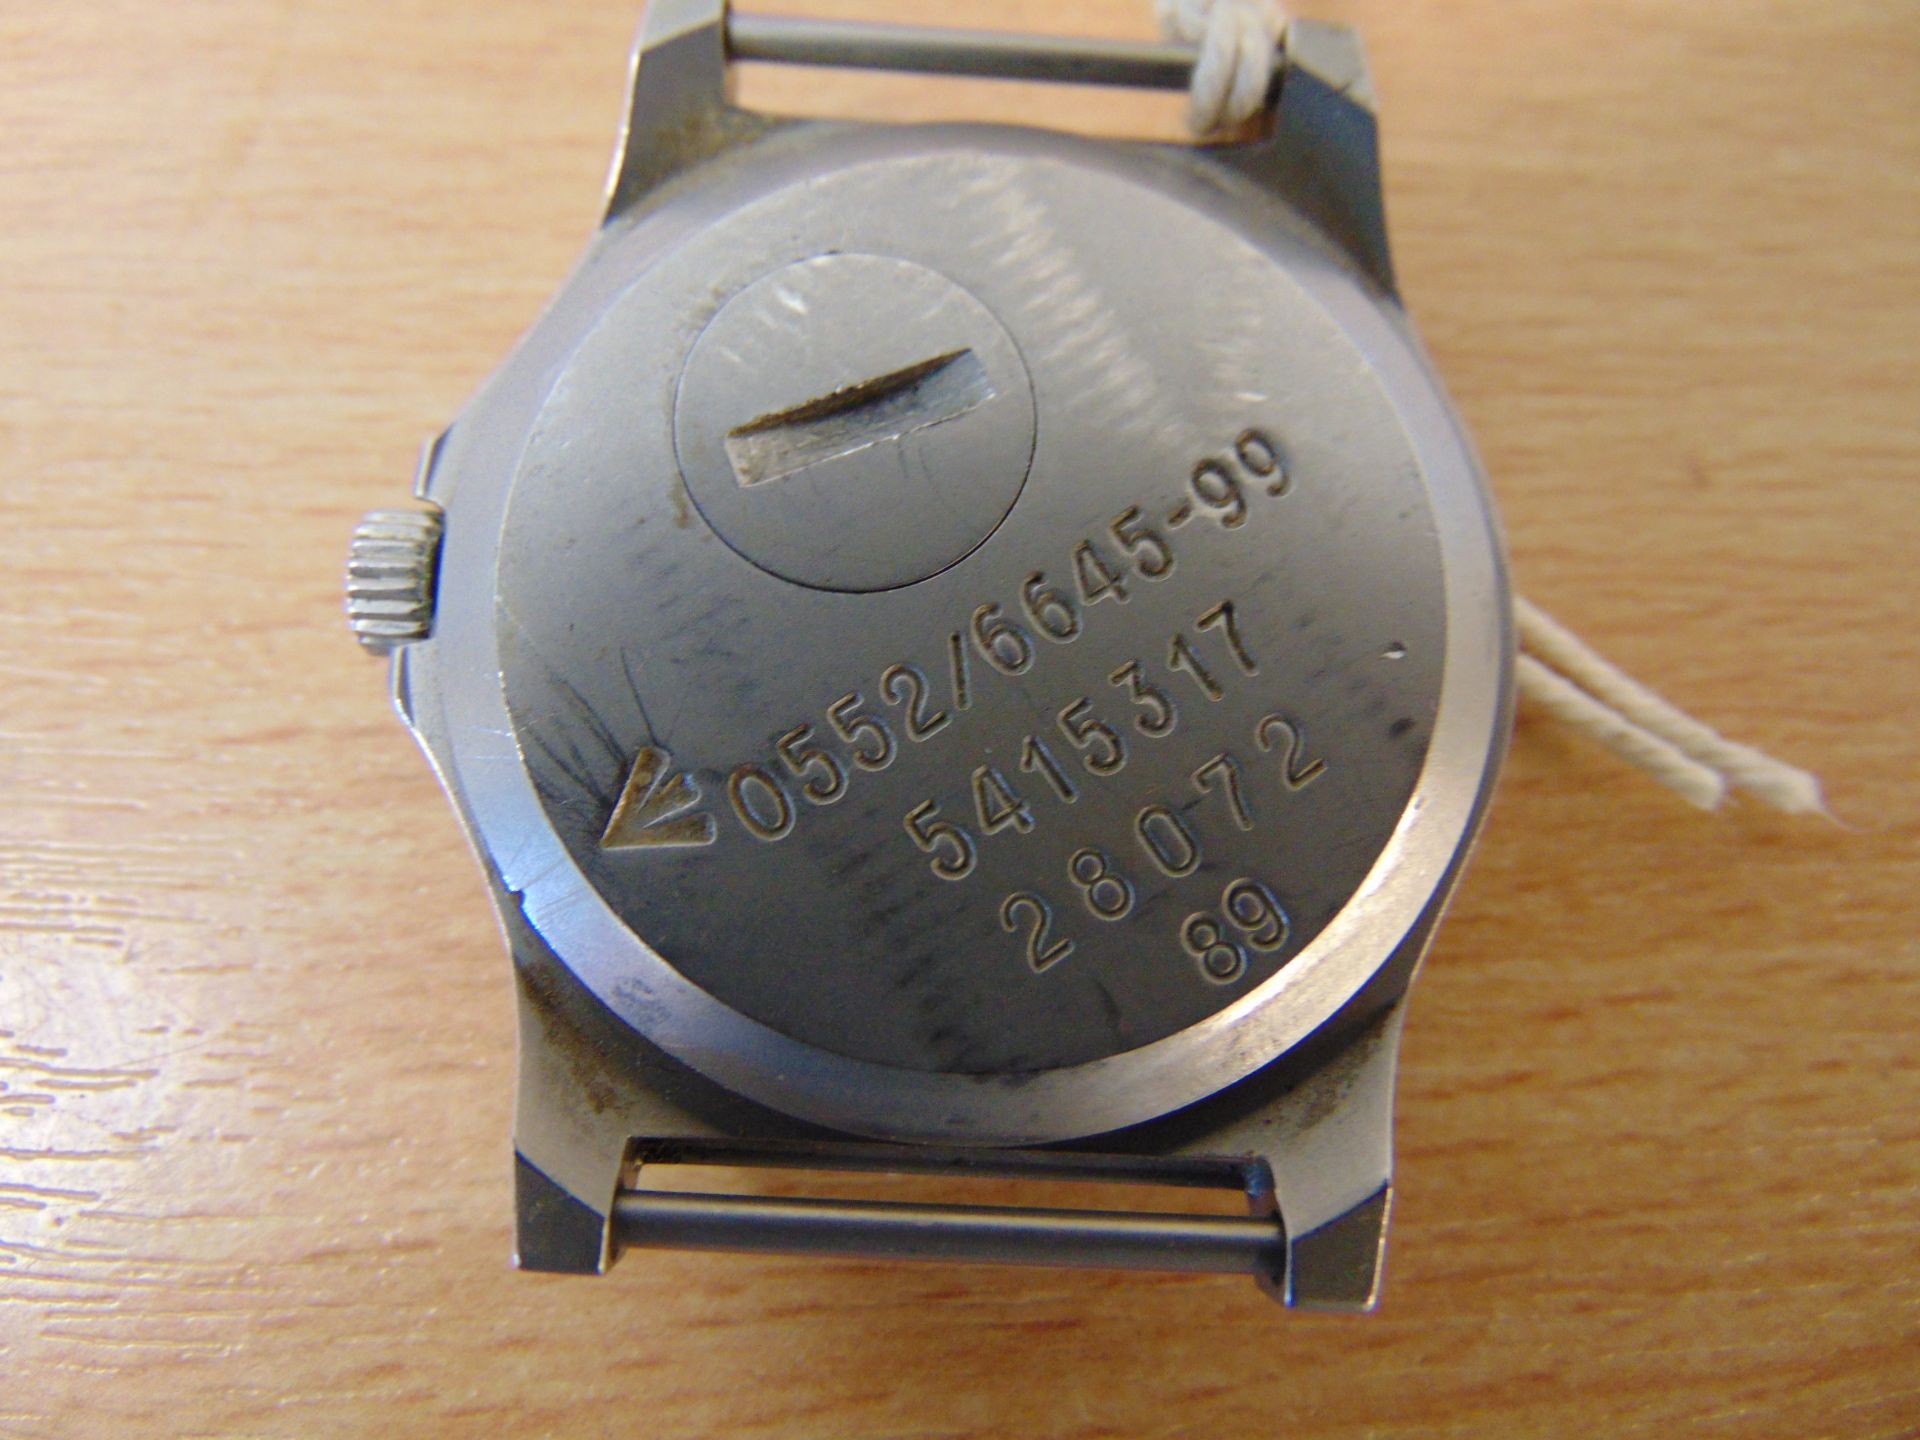 0552 CWC Royal Marines / Navy issue service watch, Nato Marks Date 1989 - Image 3 of 4